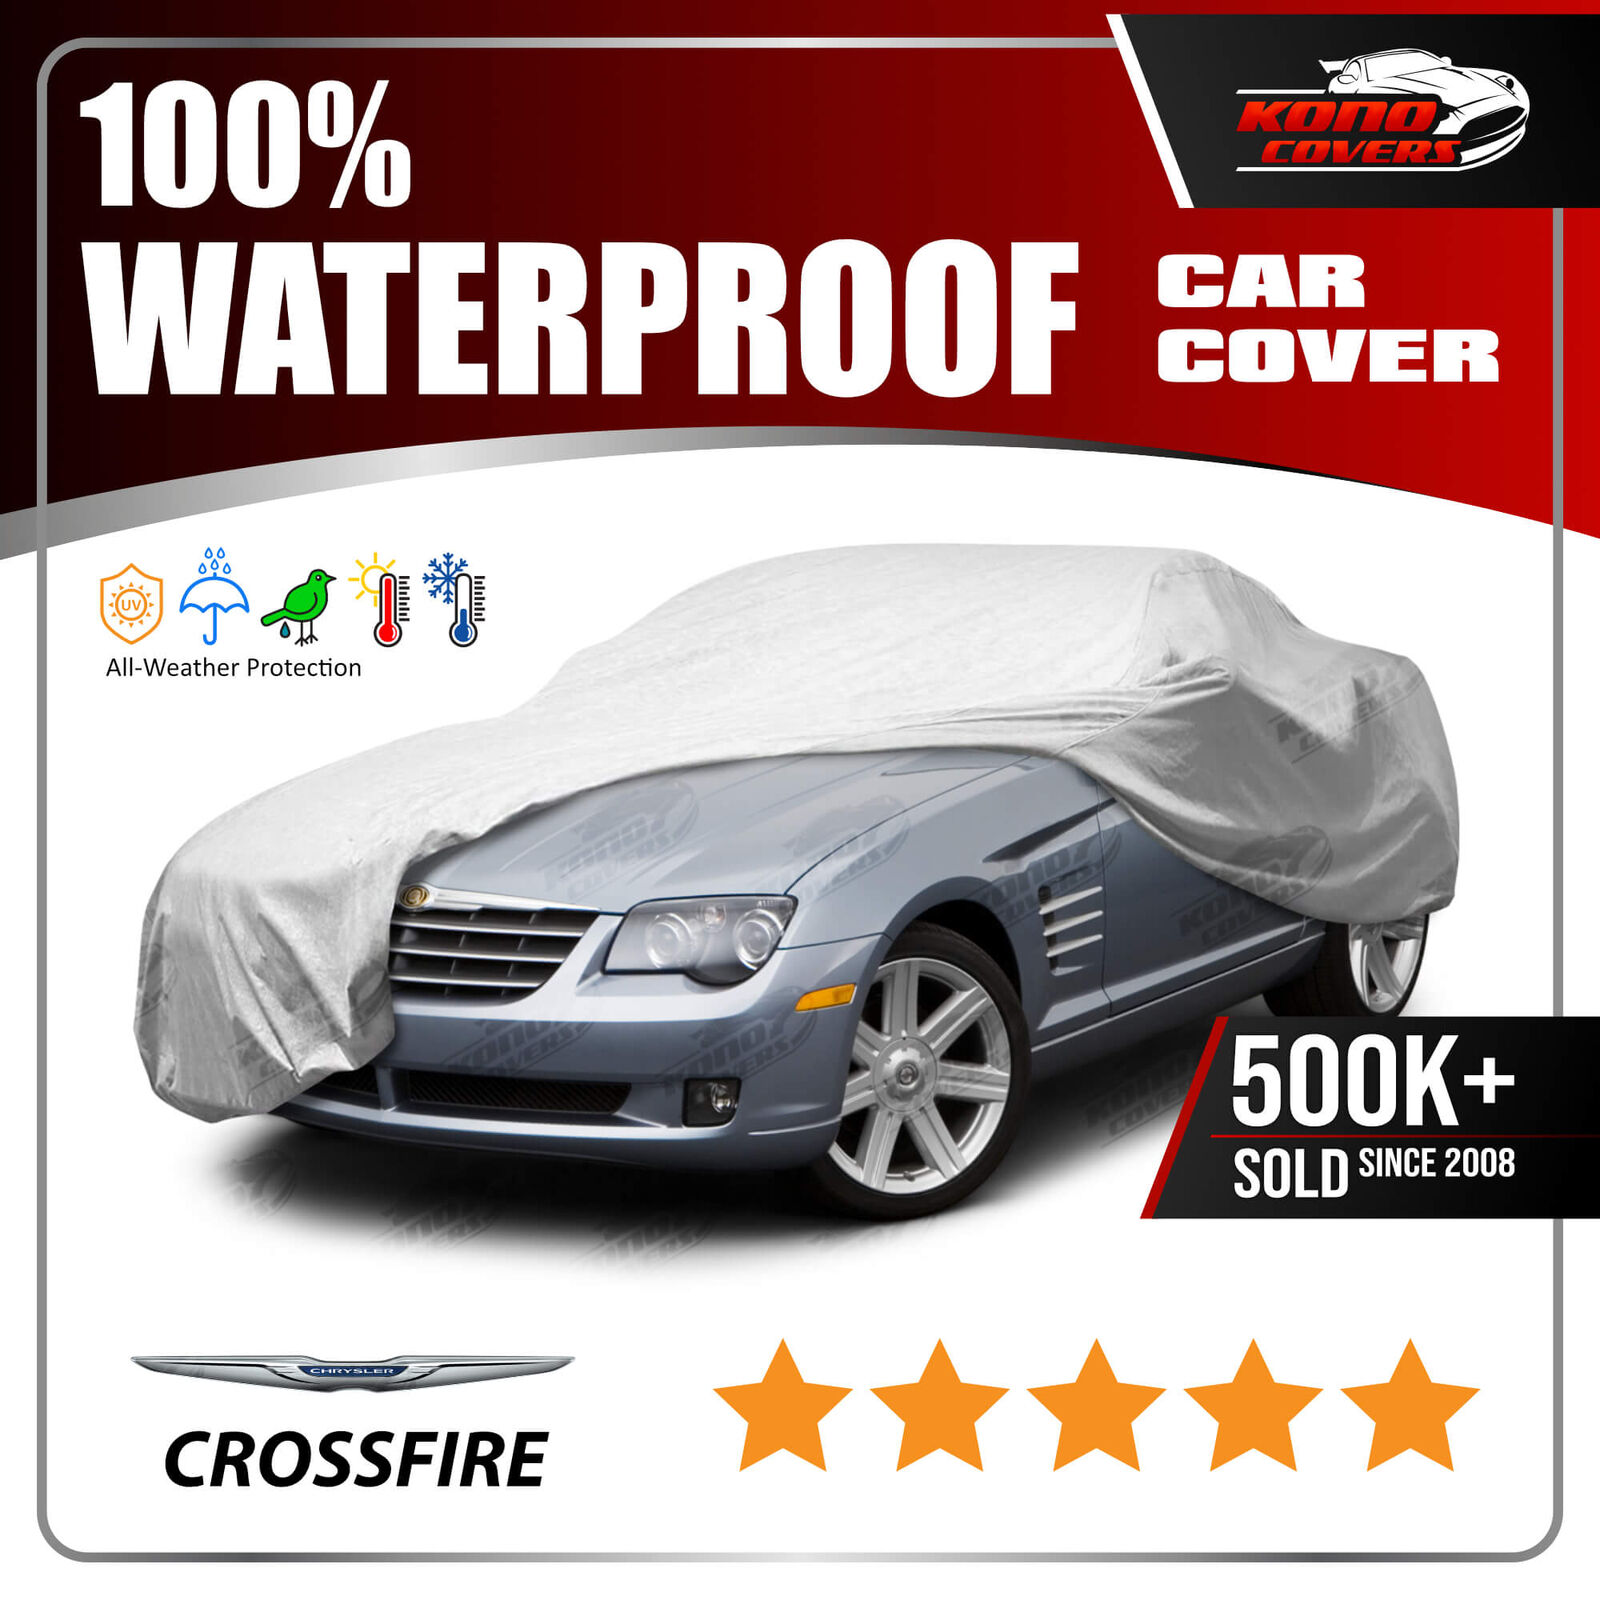 Fits Chrysler Crossfire 2004-2008 CAR COVER - 100% Waterproof 100% Breathable